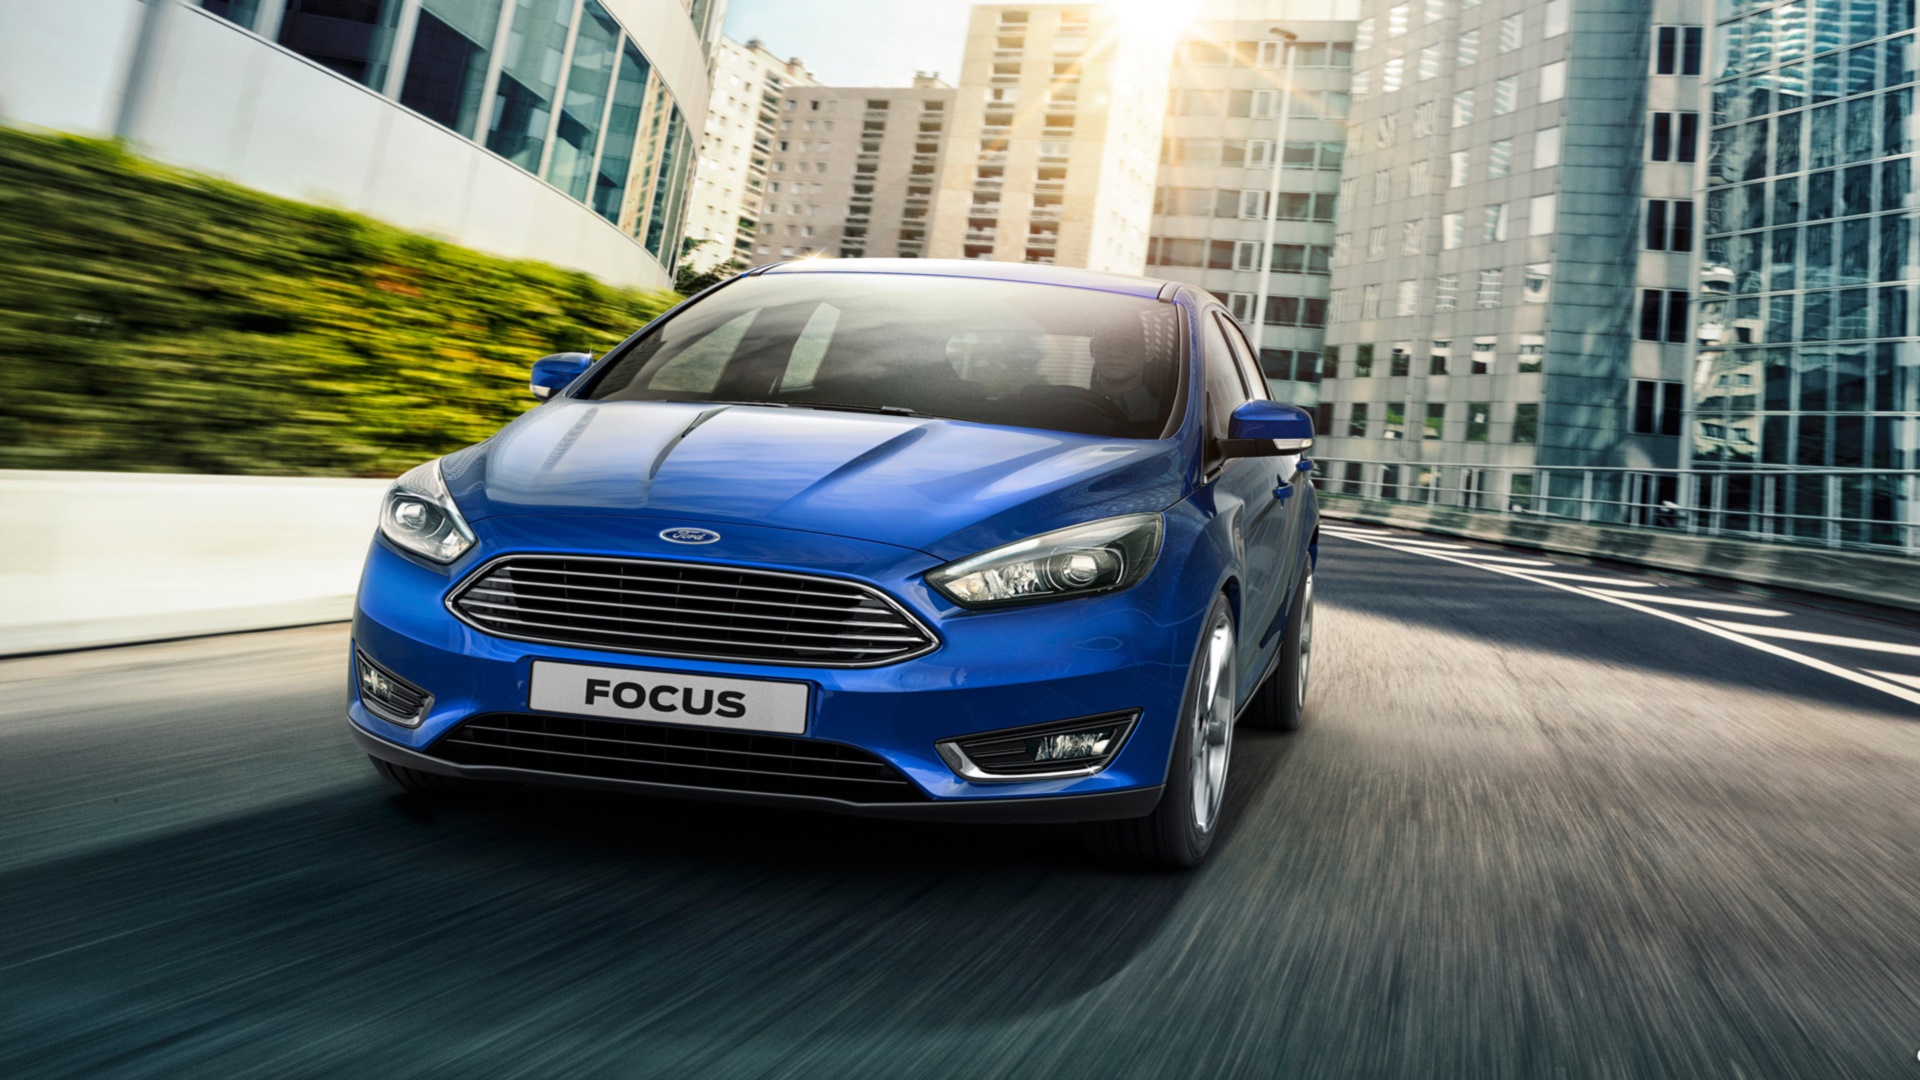 2015 Ford Focus HD Wallpapers and Backgrounds